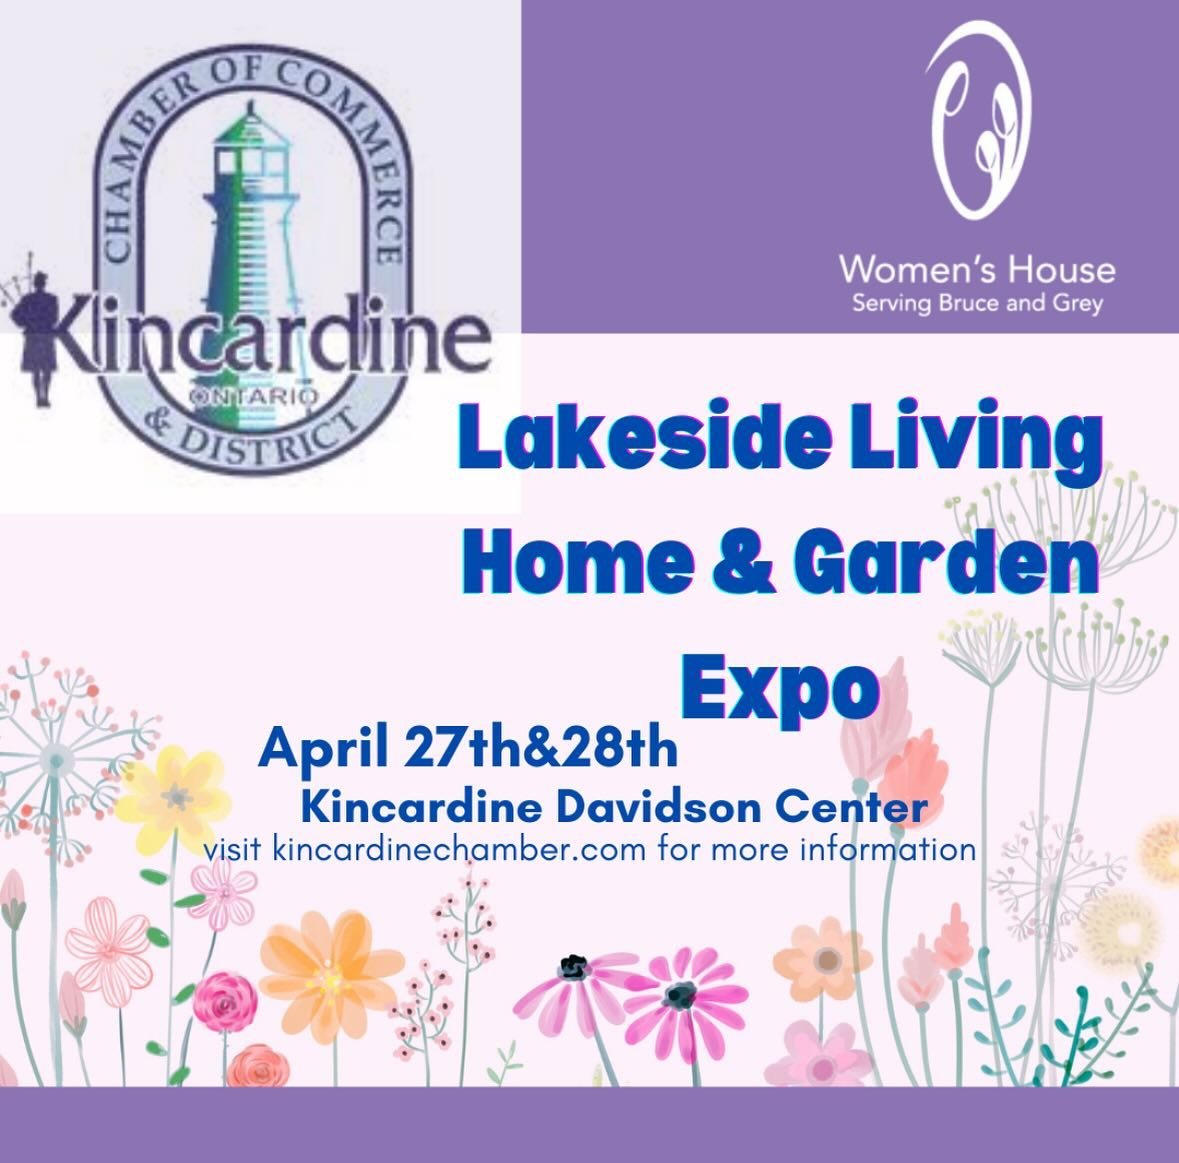 ☀️Happy Monday☀️
Looking forward to seeing everyone at Kincardine&rsquo;s Lakeside Living Home &amp; Garden Expo, this weekend at The Davidson Centre.

#whsbg #kincardinechamber #kincardinestrong #womenshelter